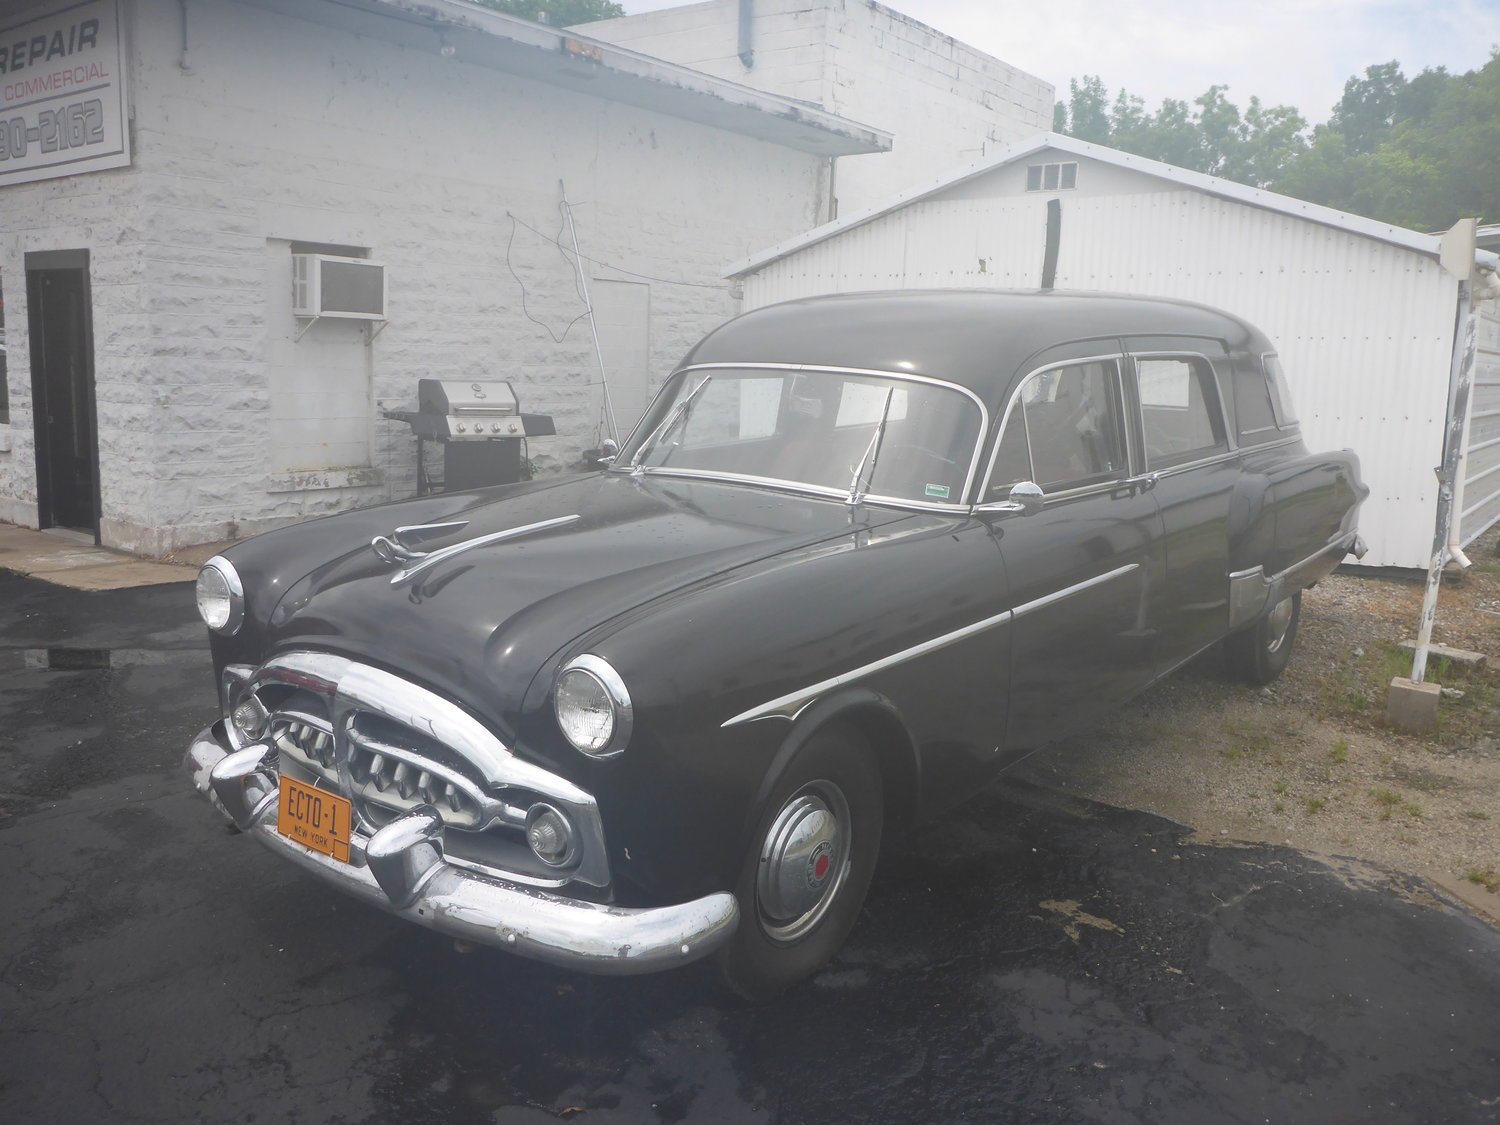 THE MILLS' vintage hearse, a 1952 Packard, is one of just four known to be in existence.